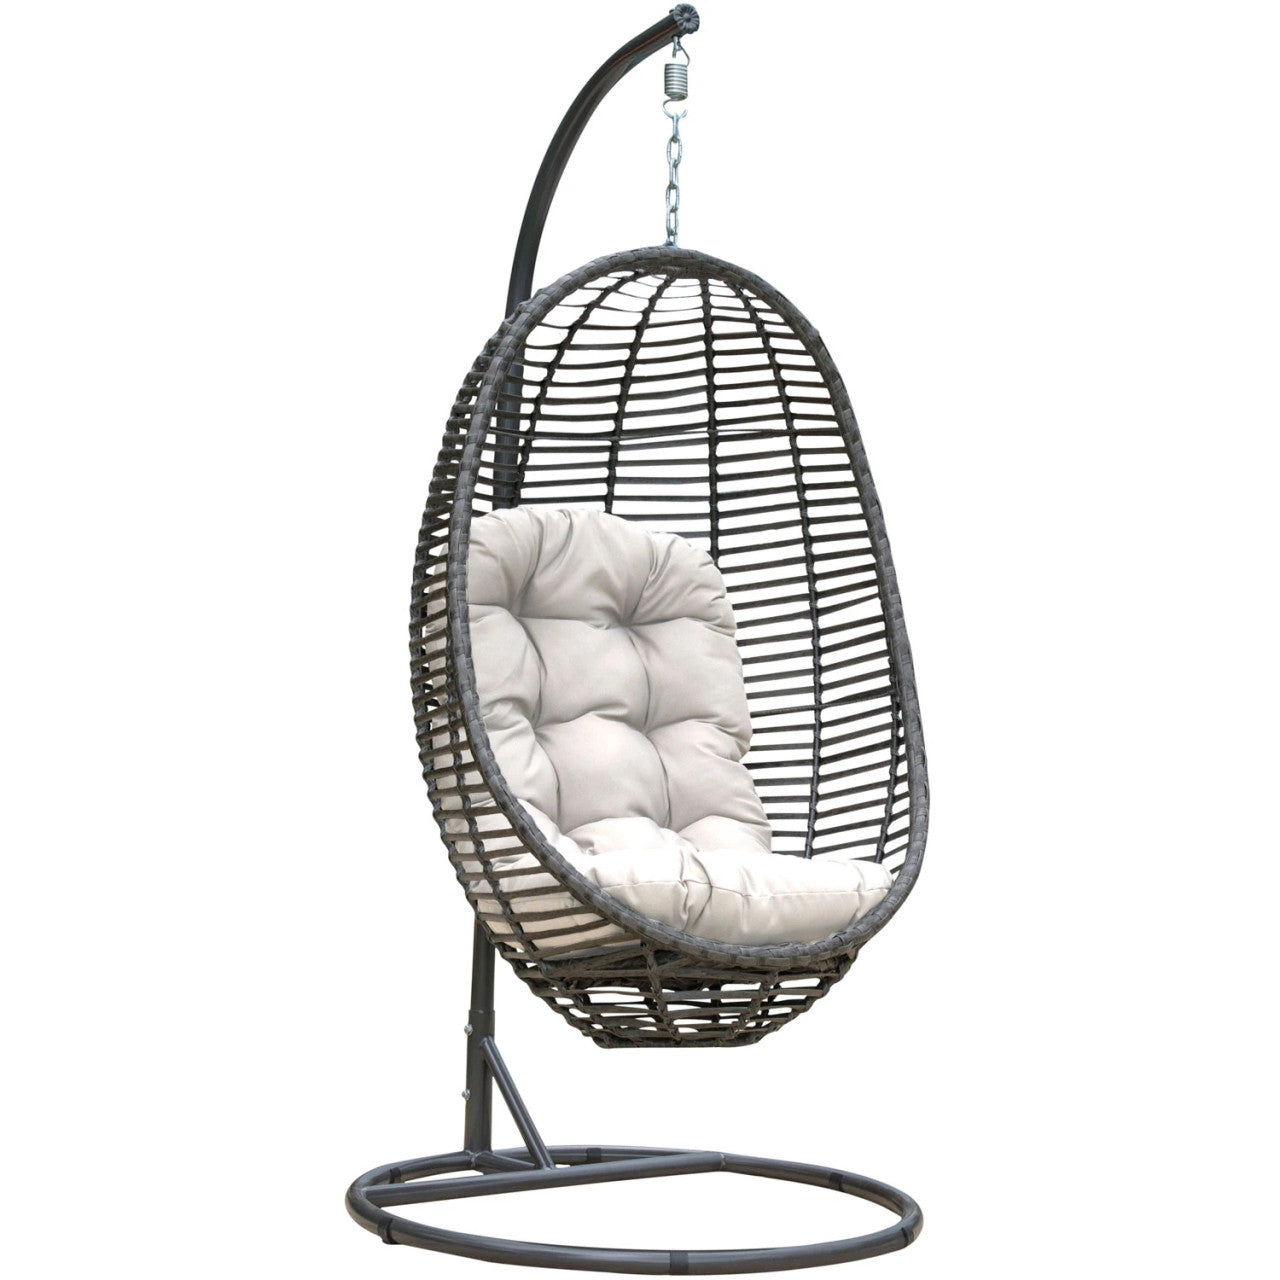 Panama Jack Graphite 2 PC Hanging Chair with Cushions Discontinued